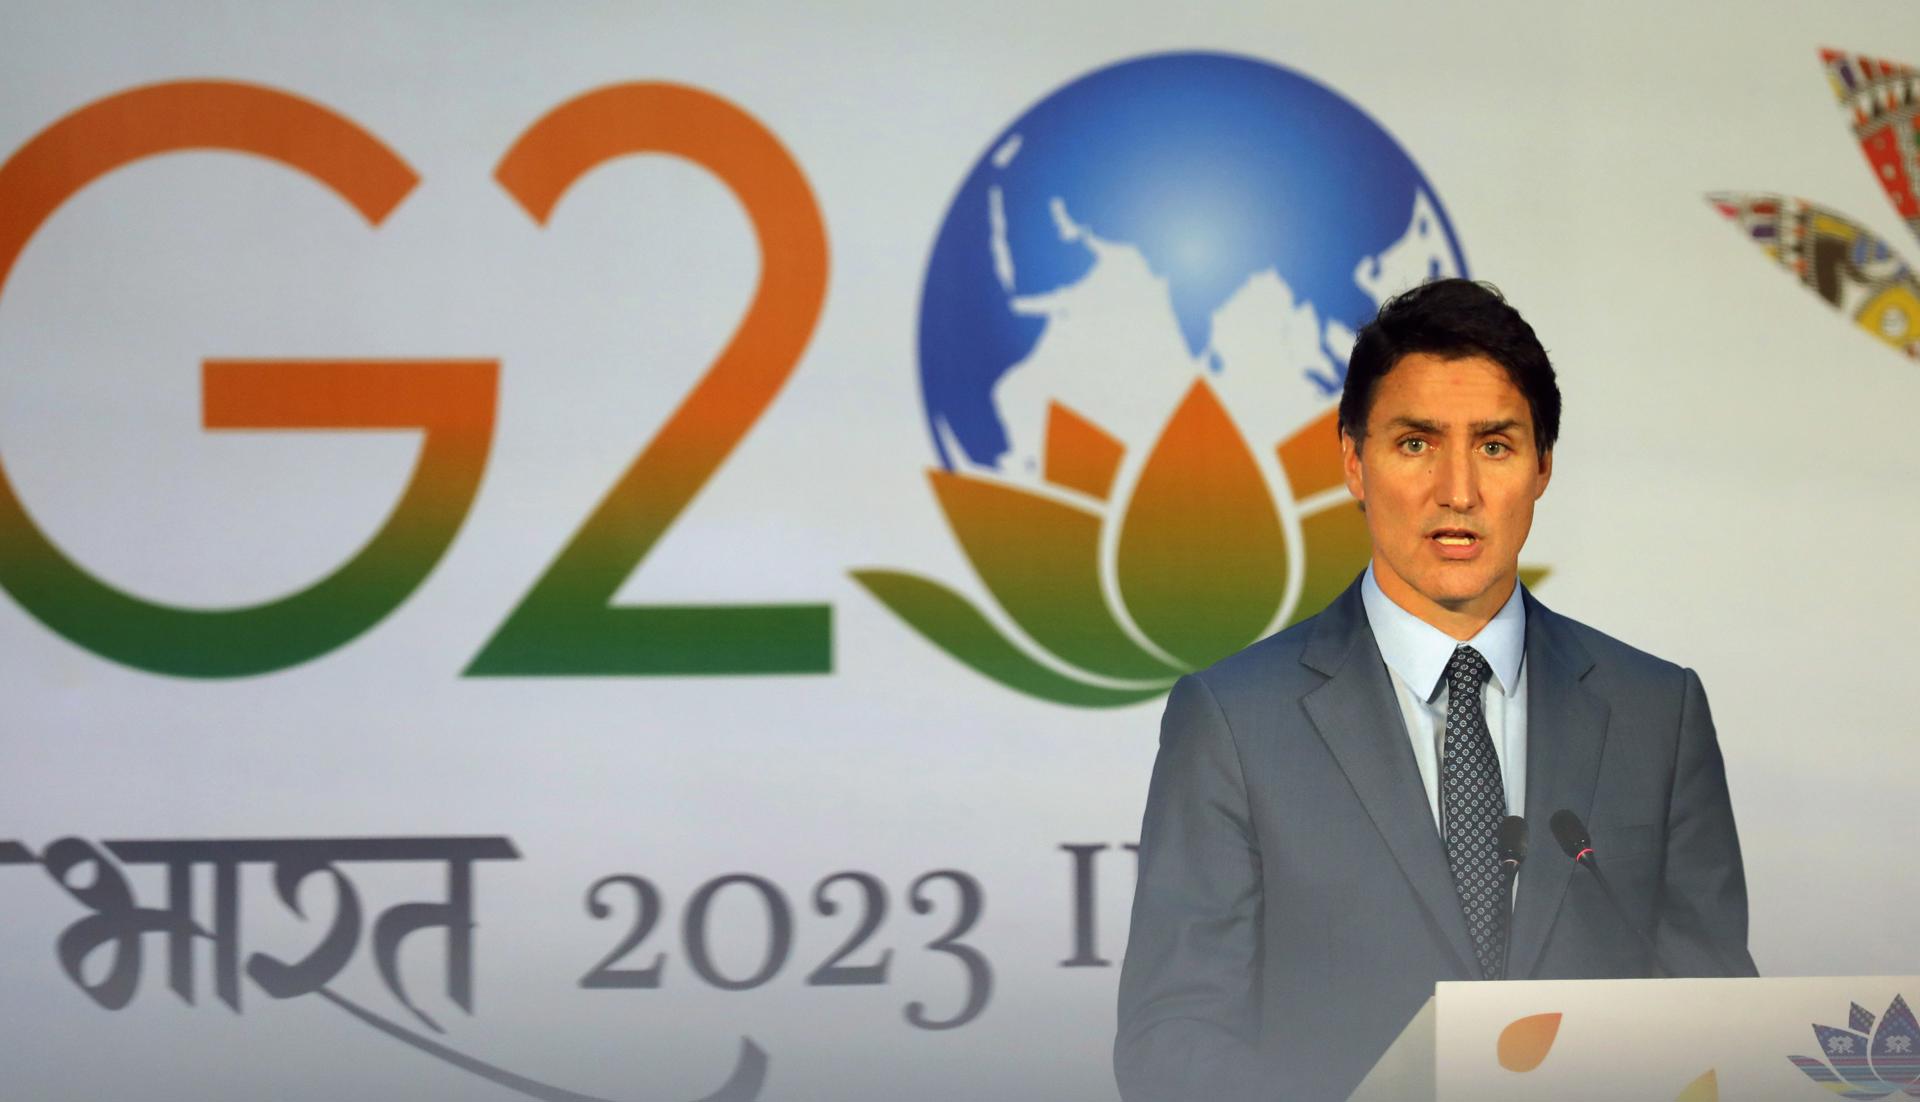 Canadian Prime Minister Justin Trudeau addresses a press conference at the international media center of the G20 Summit at the ITPO Convention Centre Pragati Maidan in New Delhi, India, 10 September 2023. EFE/EPA/FILE/RAJAT GUPTA